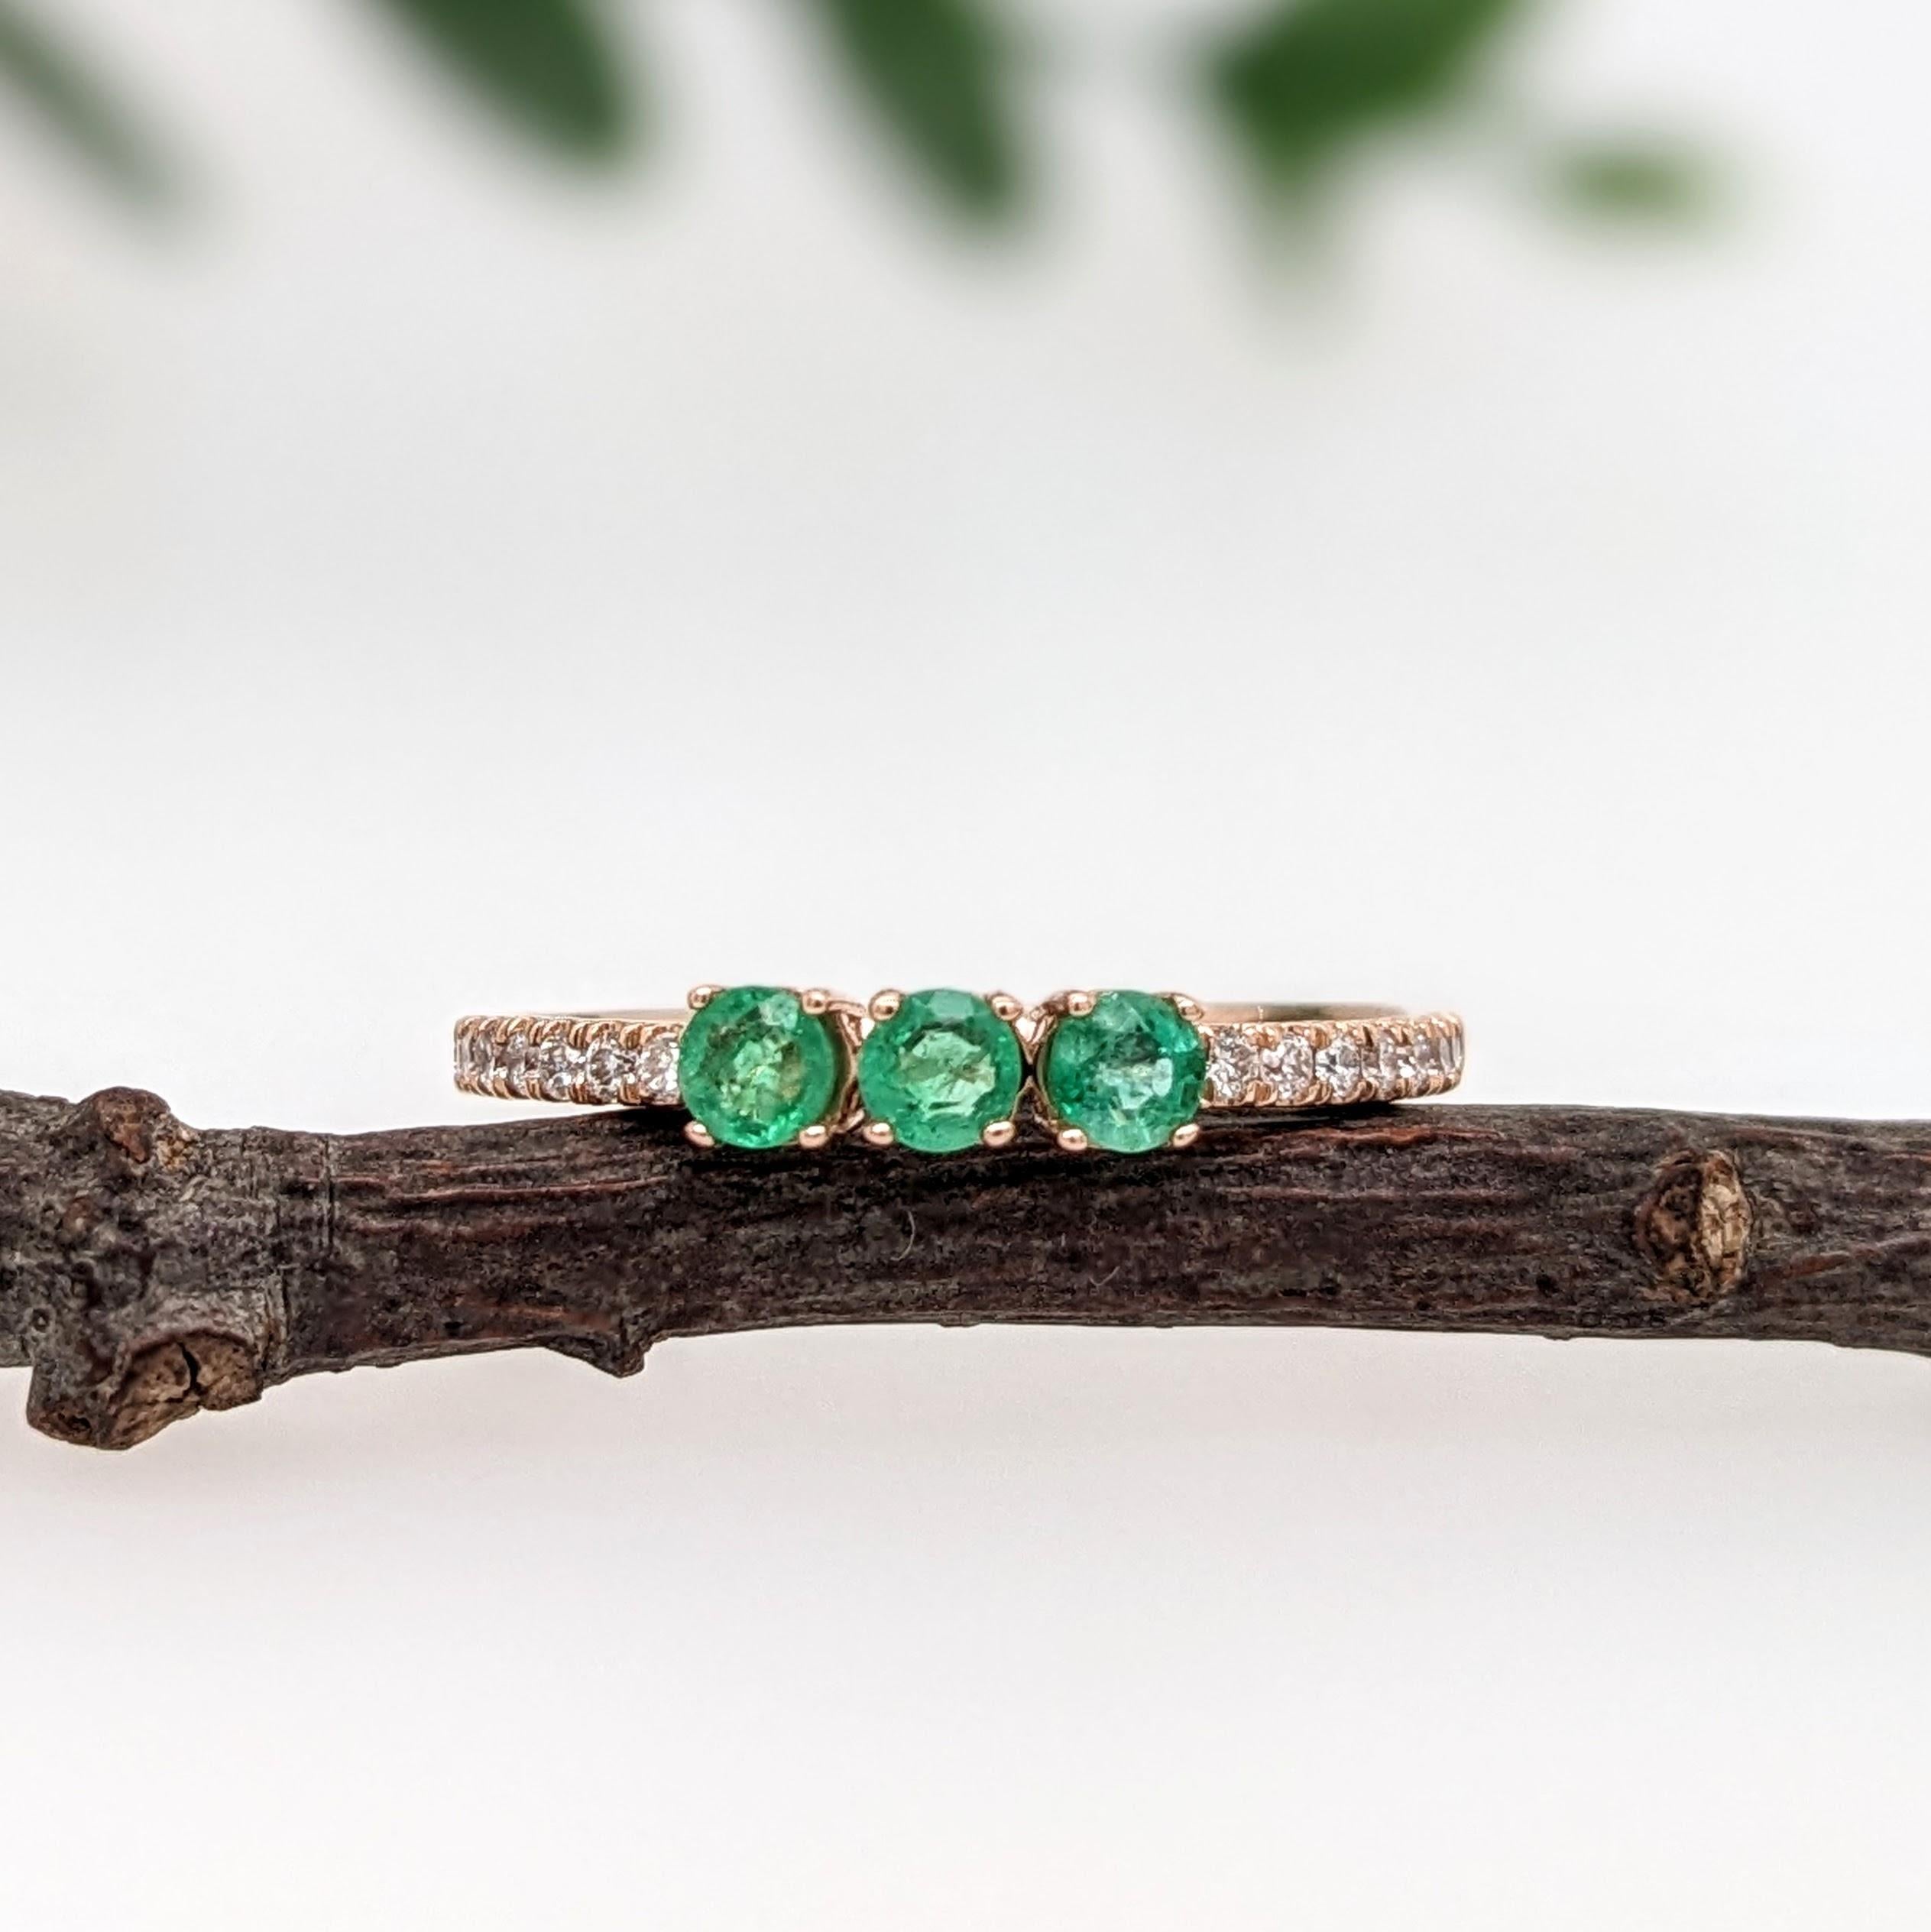 This sleek 3 stone emerald fashion ring with natural diamonds is subtle and classy. It's sturdy band allows for every day, worry-free wear.
This ring also makes a beautiful May birthstone ring for your loved ones. 

The occasions to show off this